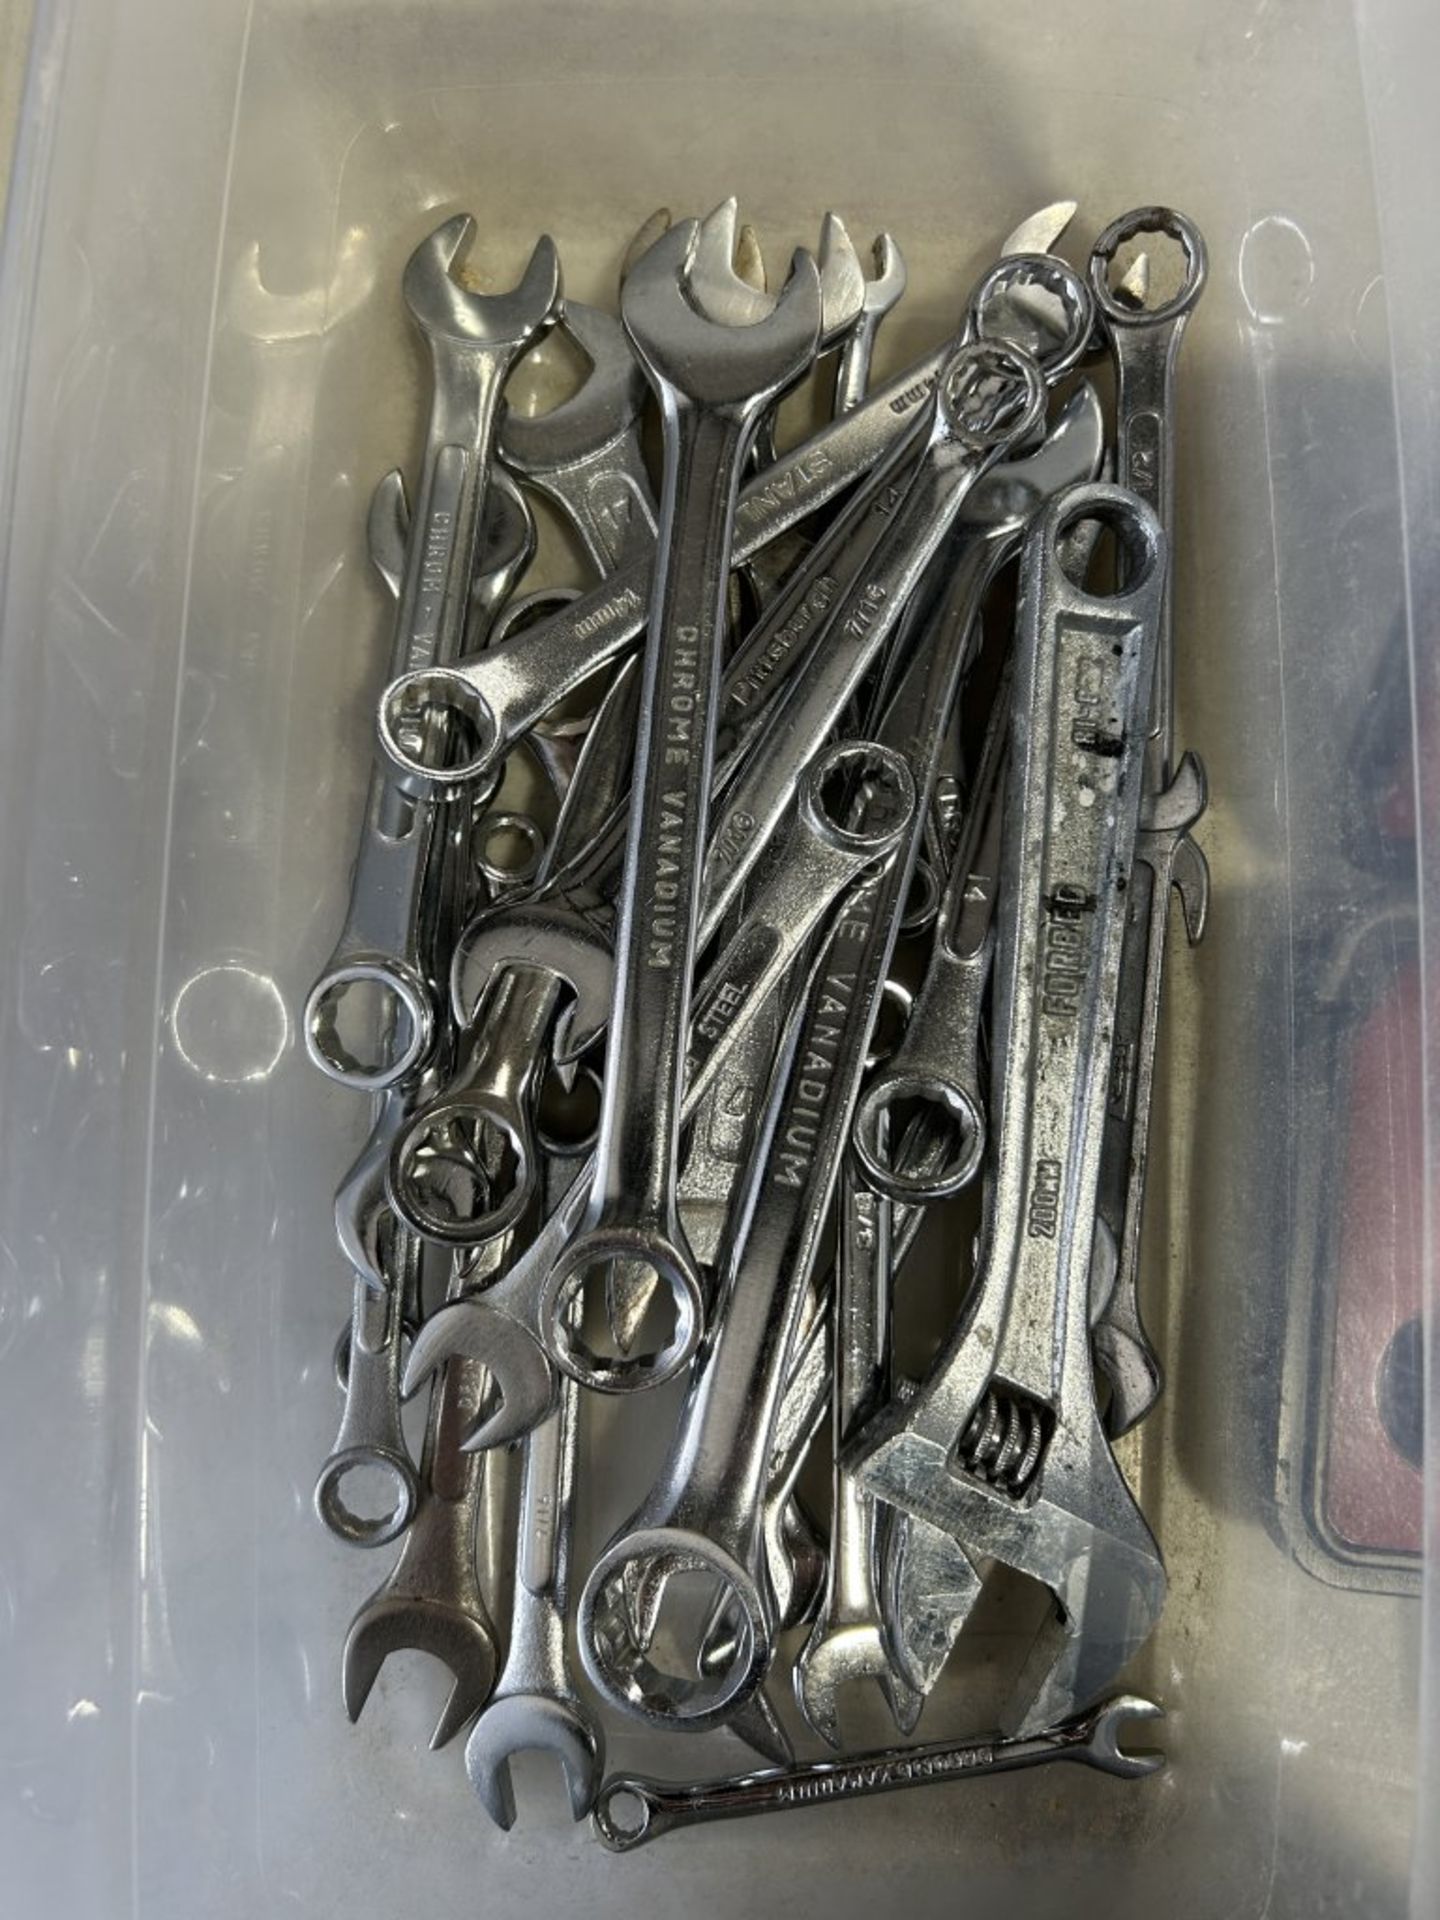 ASSORTED SOCKET SETS, WRENCHES, SUPER SOCKETS, ETC. - Image 4 of 7